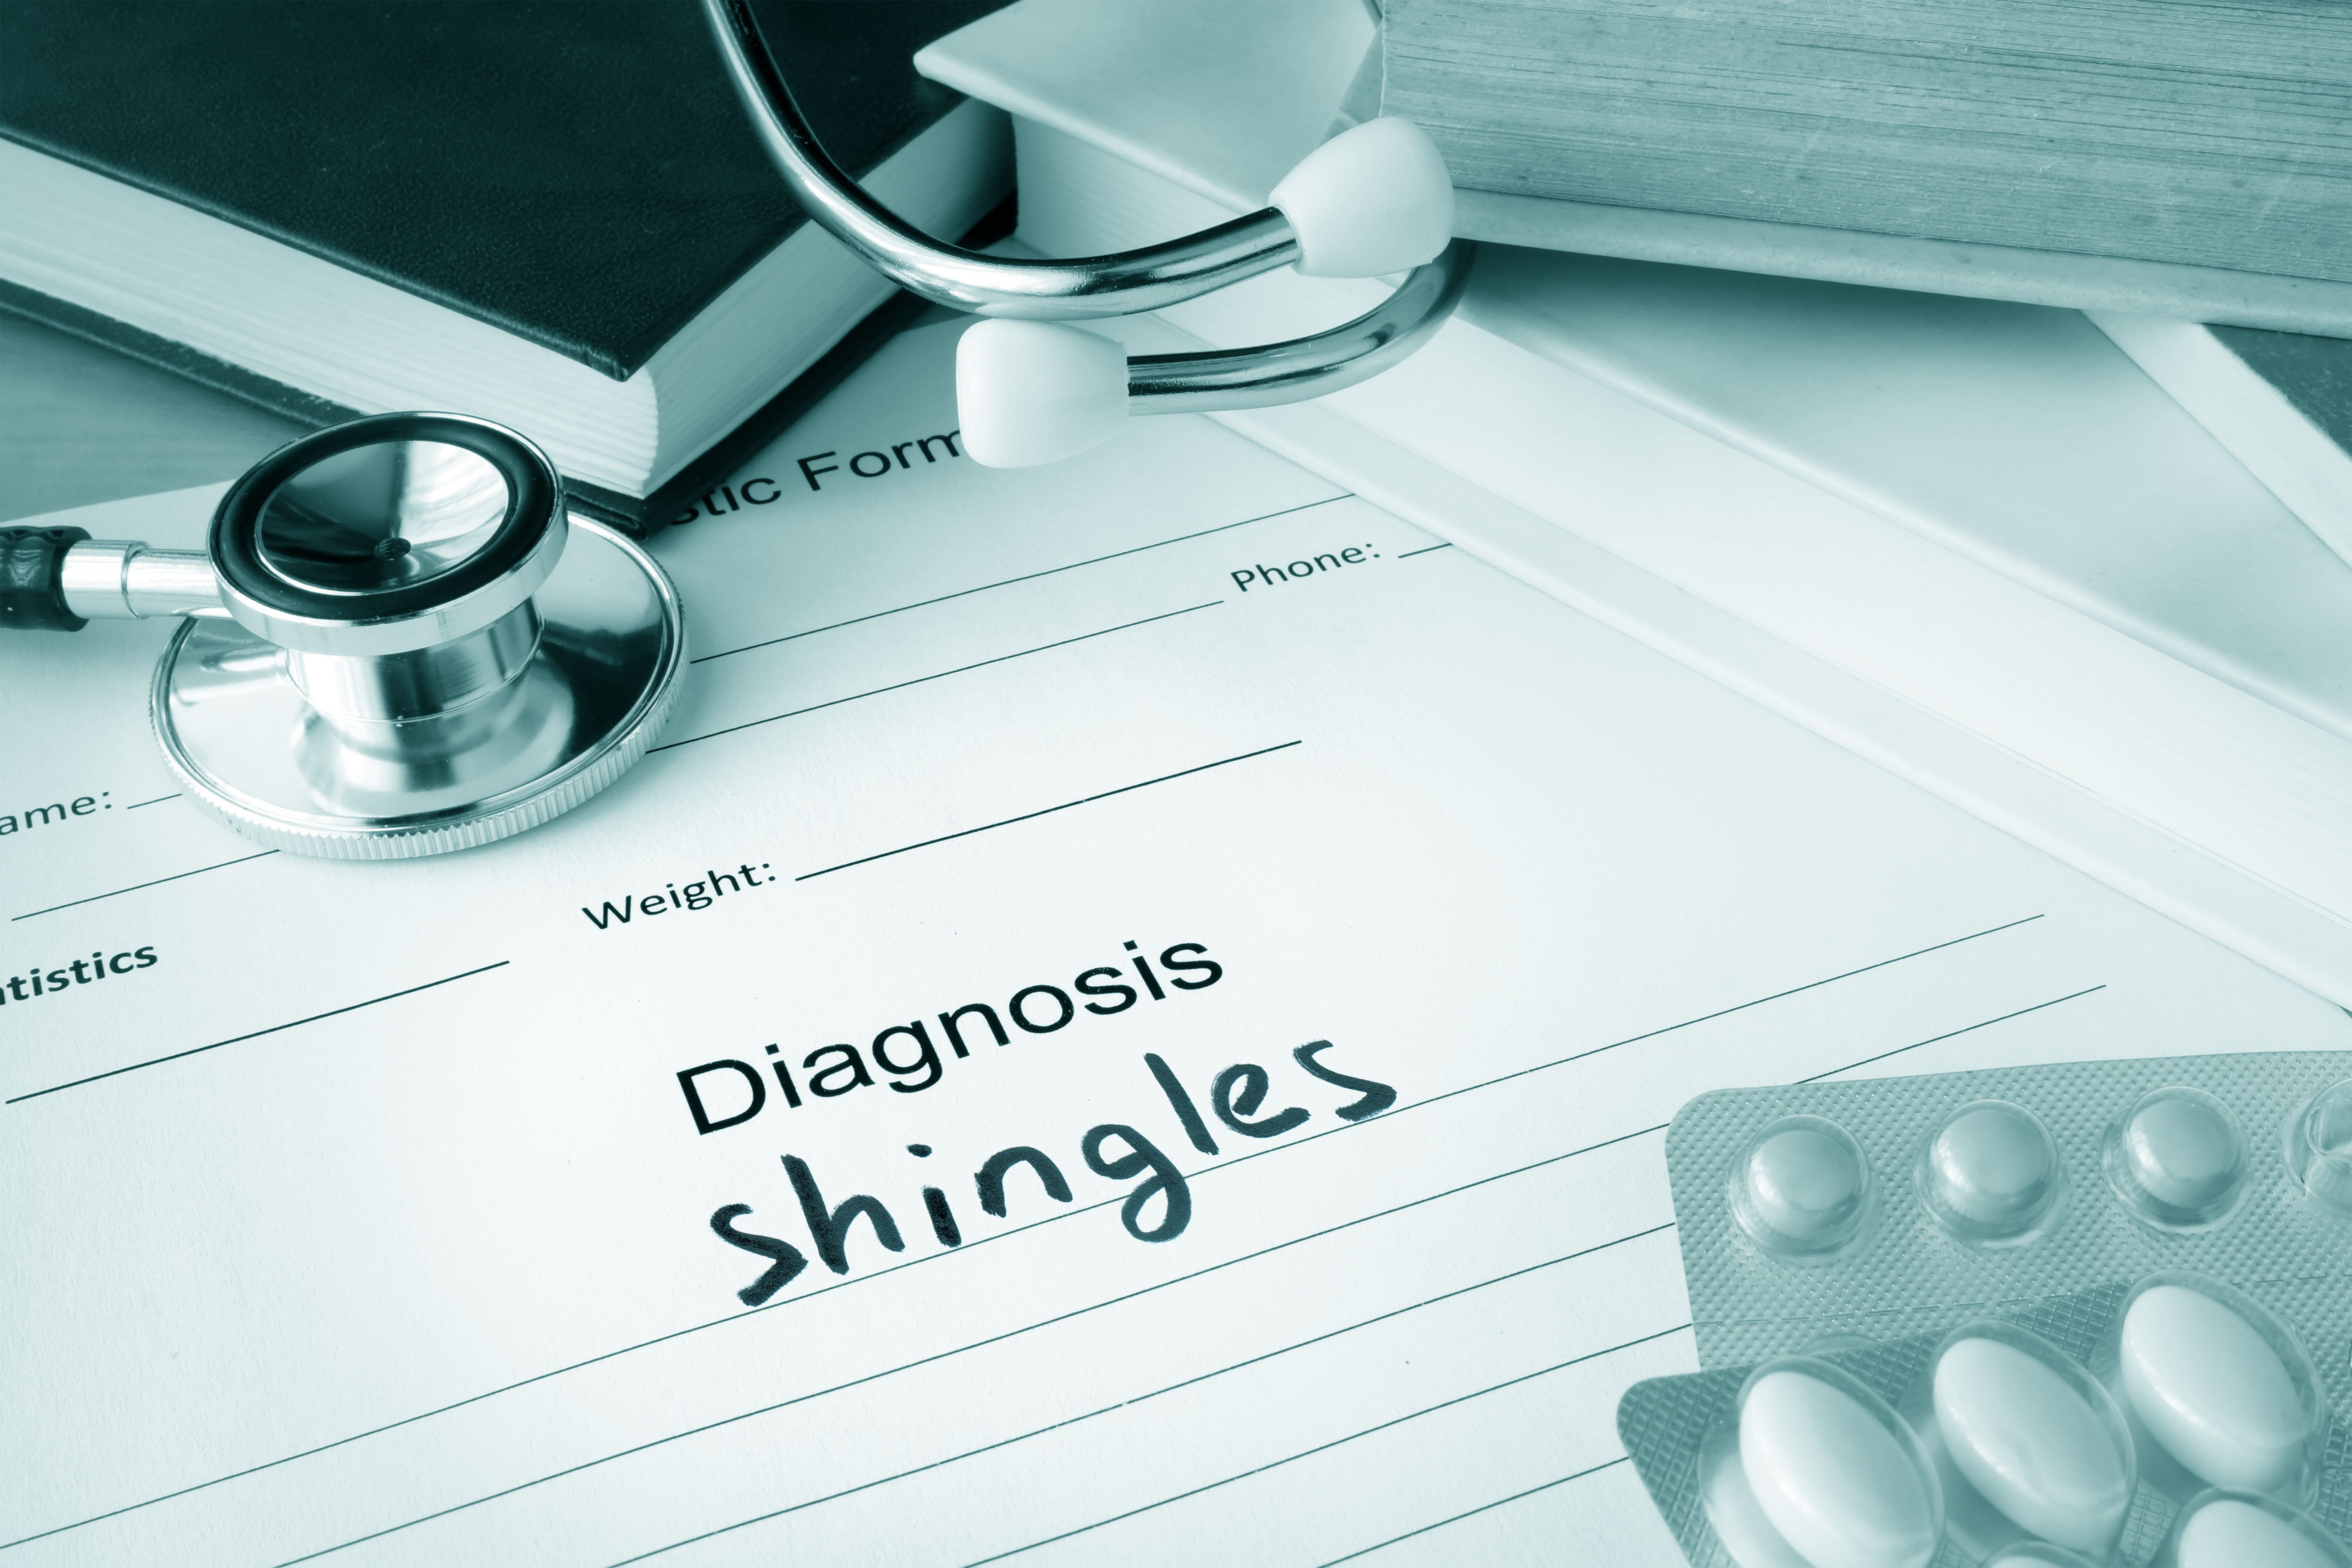 Close-up of a patient chart with the diagnosis of "shingles" written on